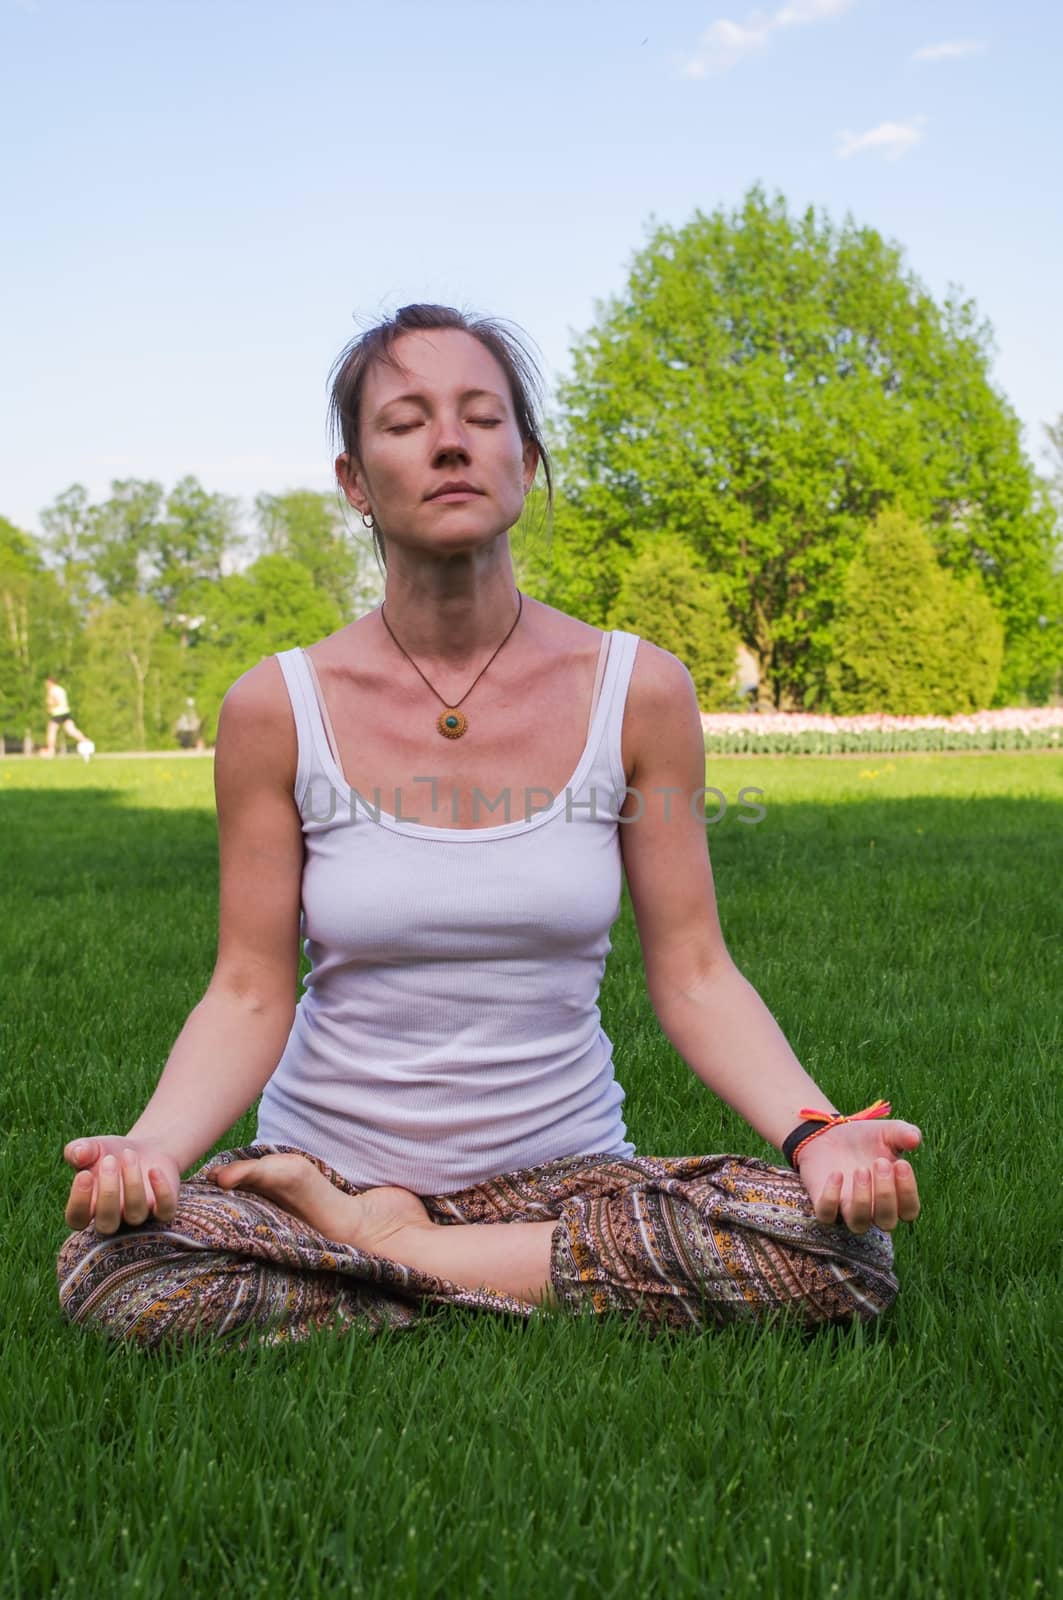 a young woman sitting in yoga lotus pose meditation outdoors